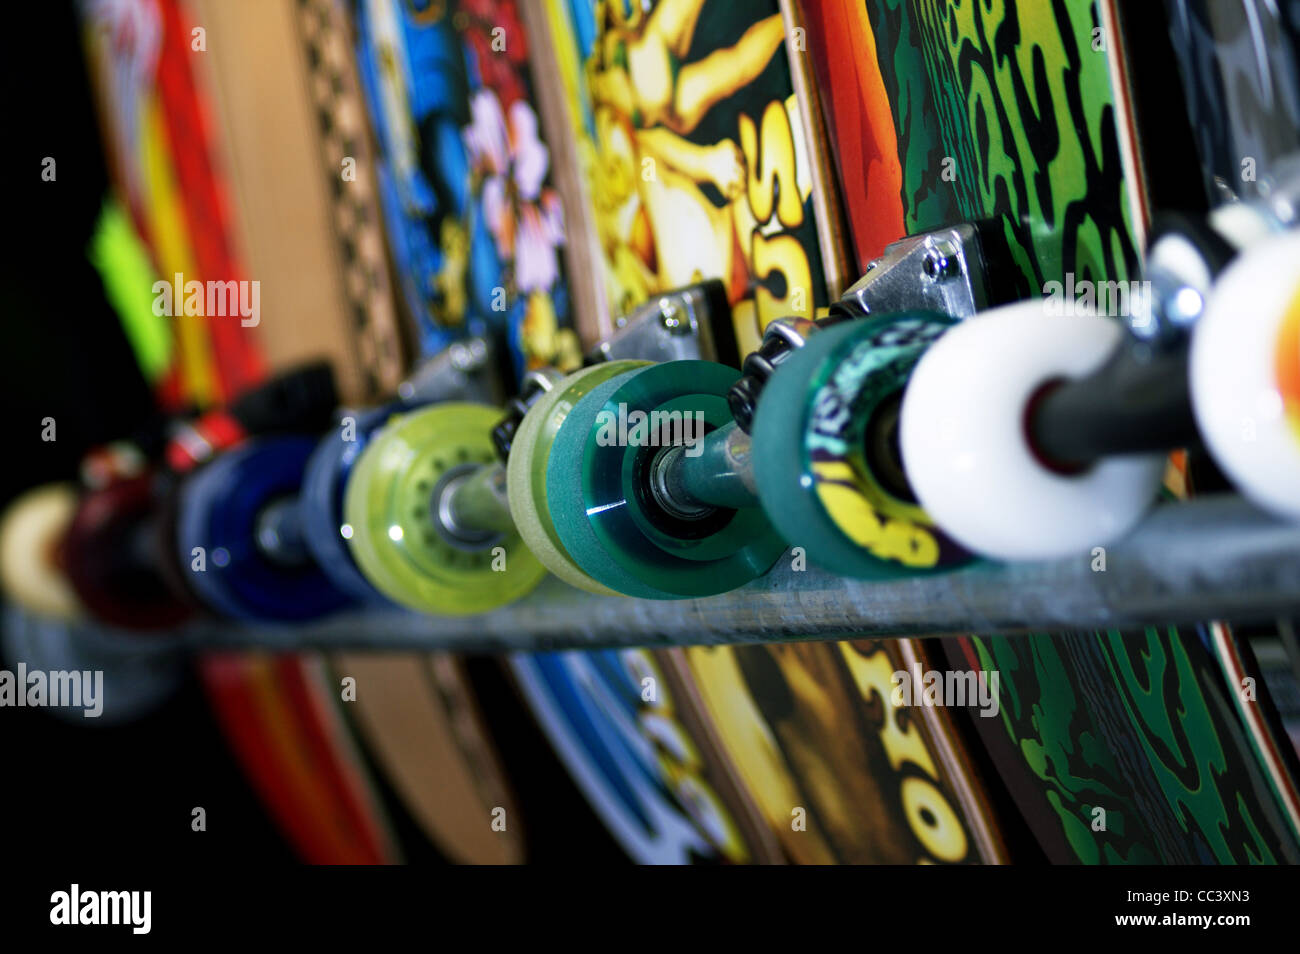 A row of skateboards on sale in a skate shop, Swansea, UK Stock Photo